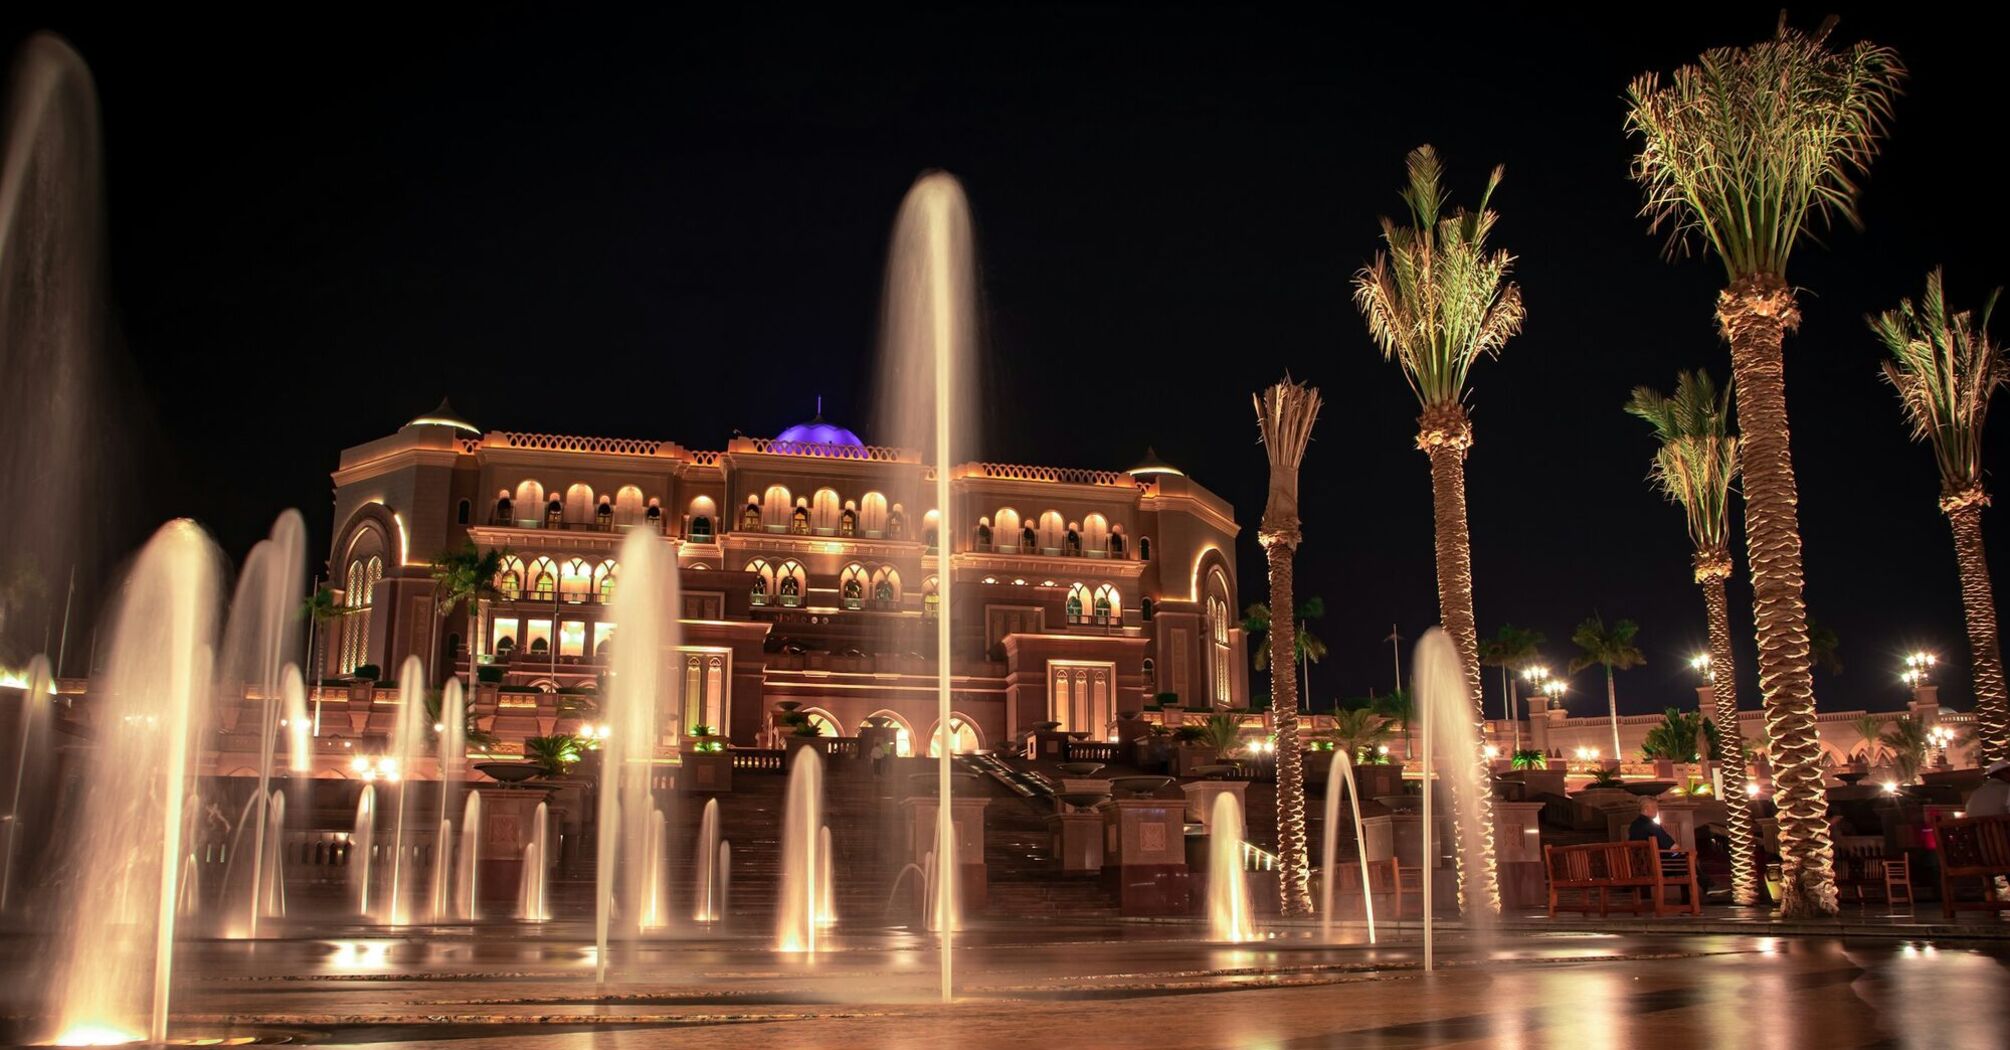 A night view of an illuminated luxurious building with arched windows and palm trees, flanked by water fountains